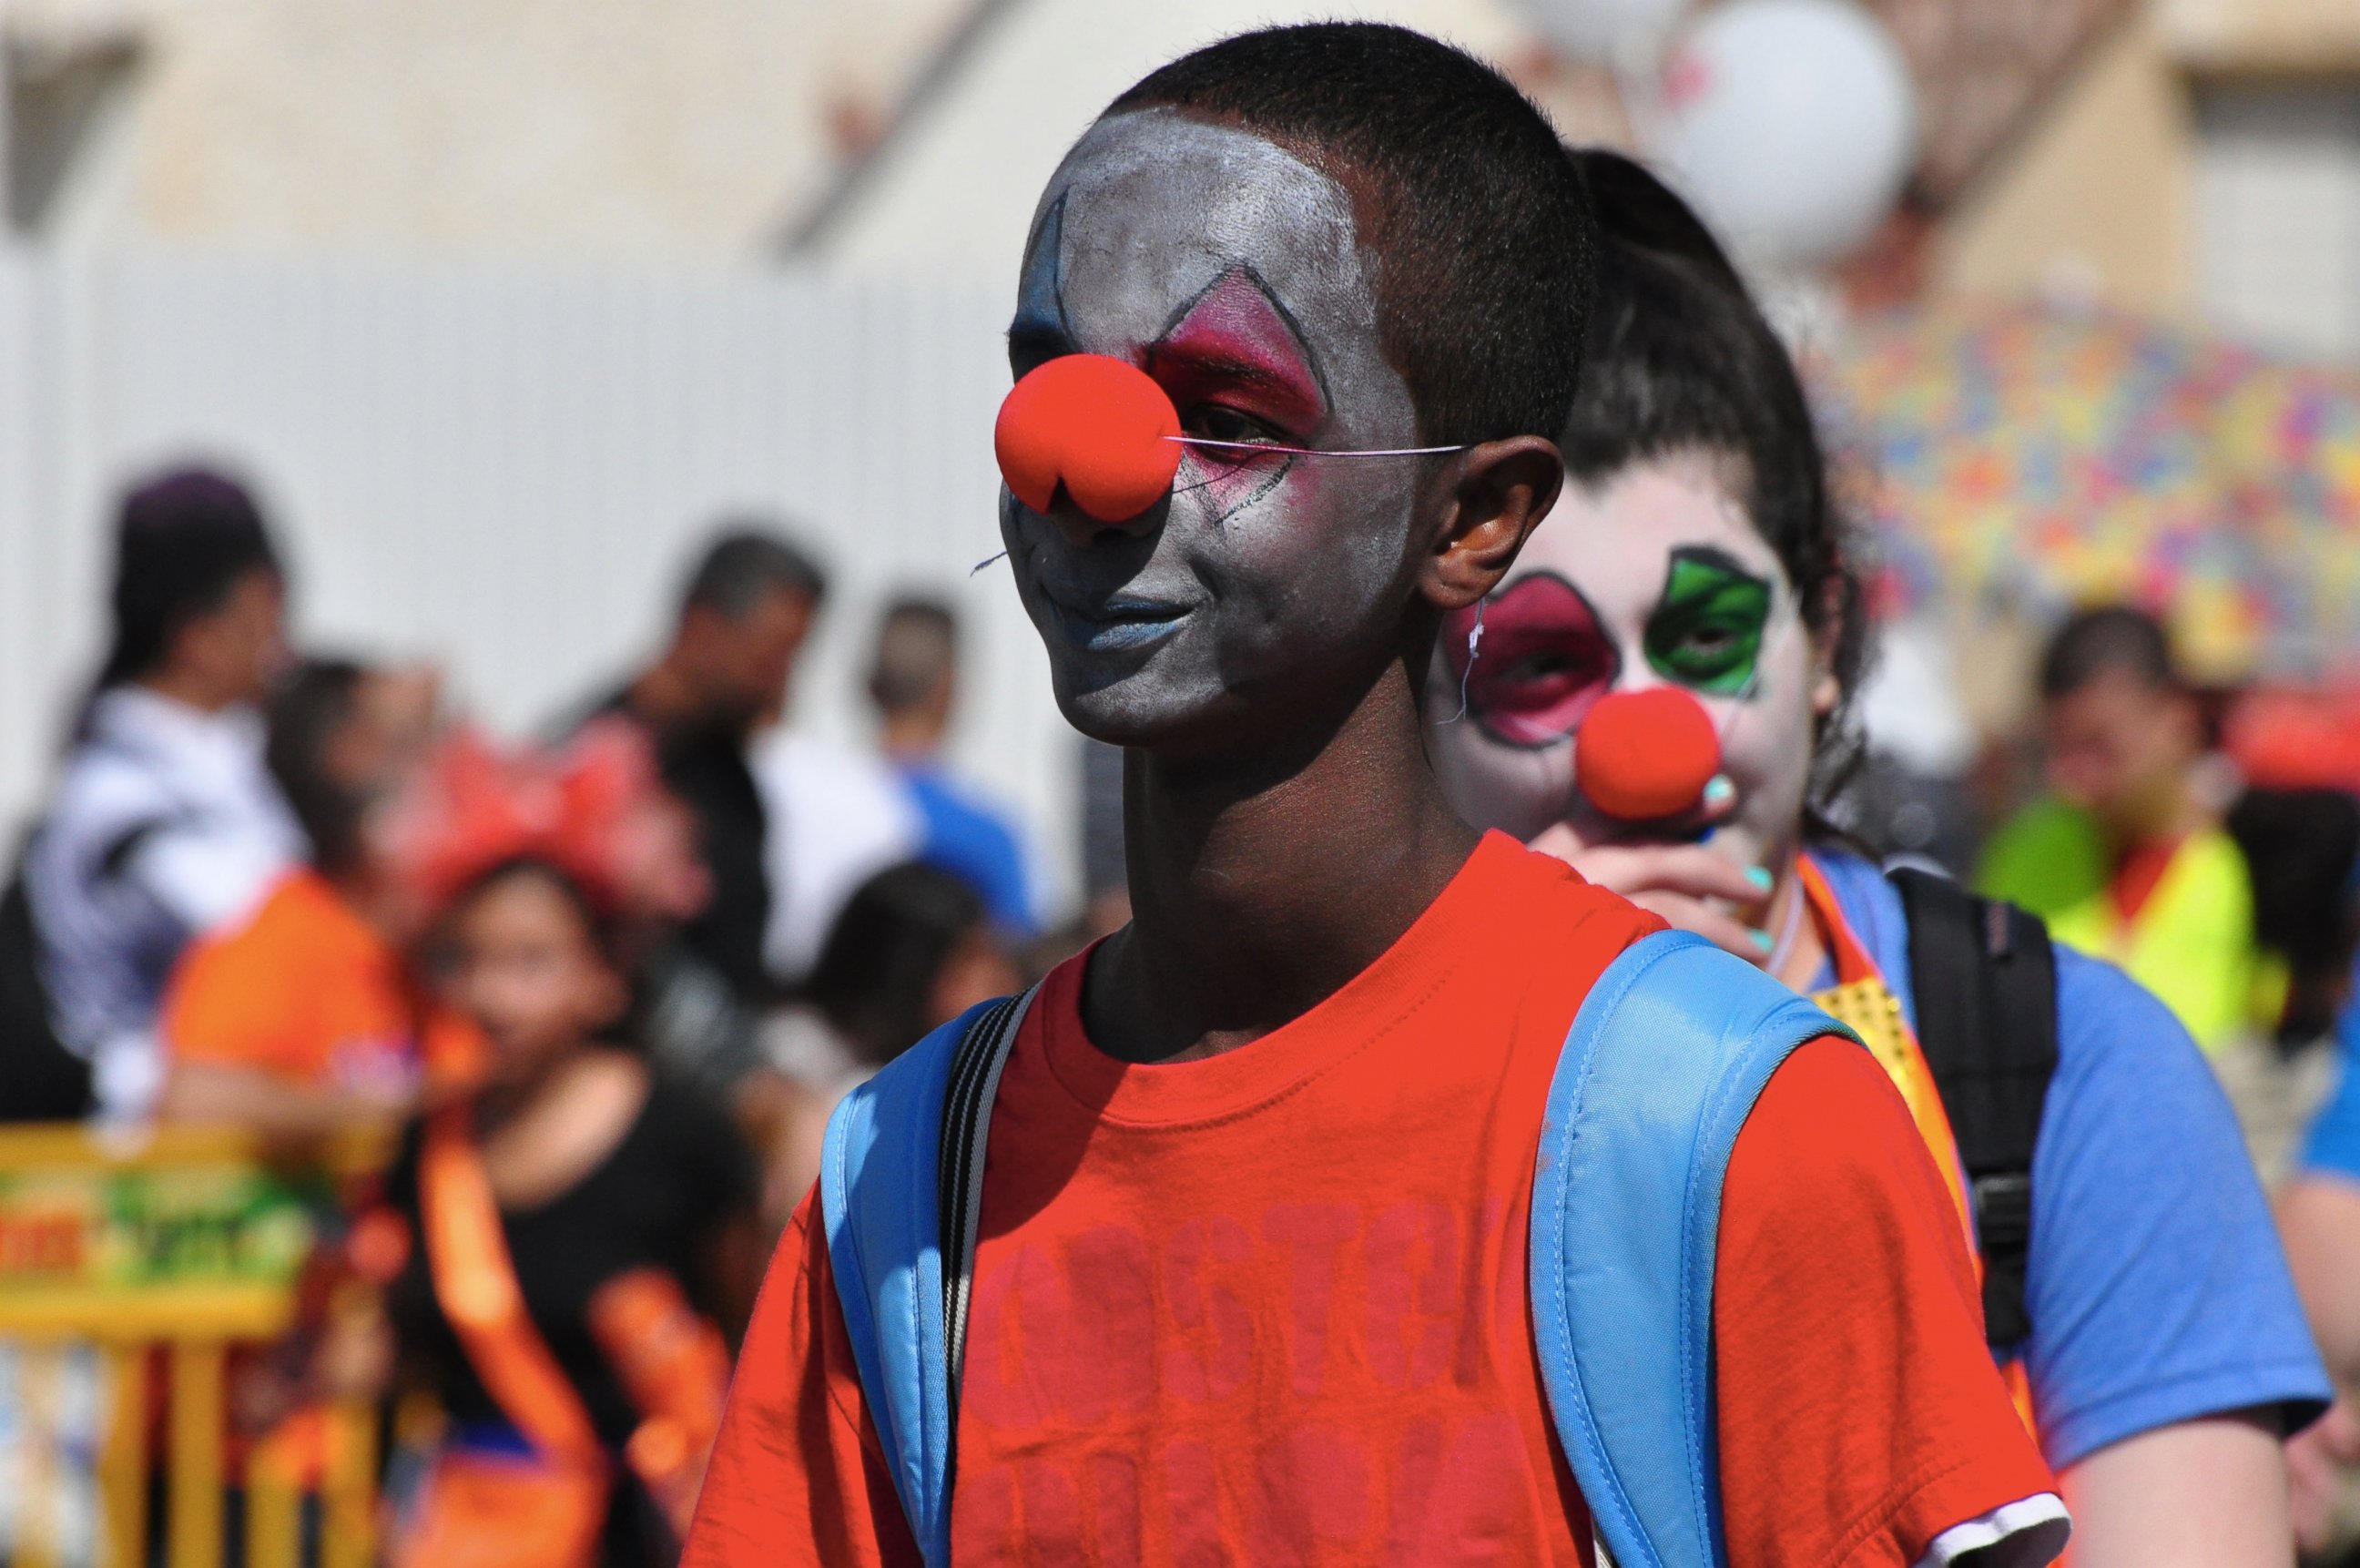 PHOTO: Masked children at the Adloyada, the biggest Purim parade in Israel, are pictured on March 5, 2015 in Holon, Israel. 